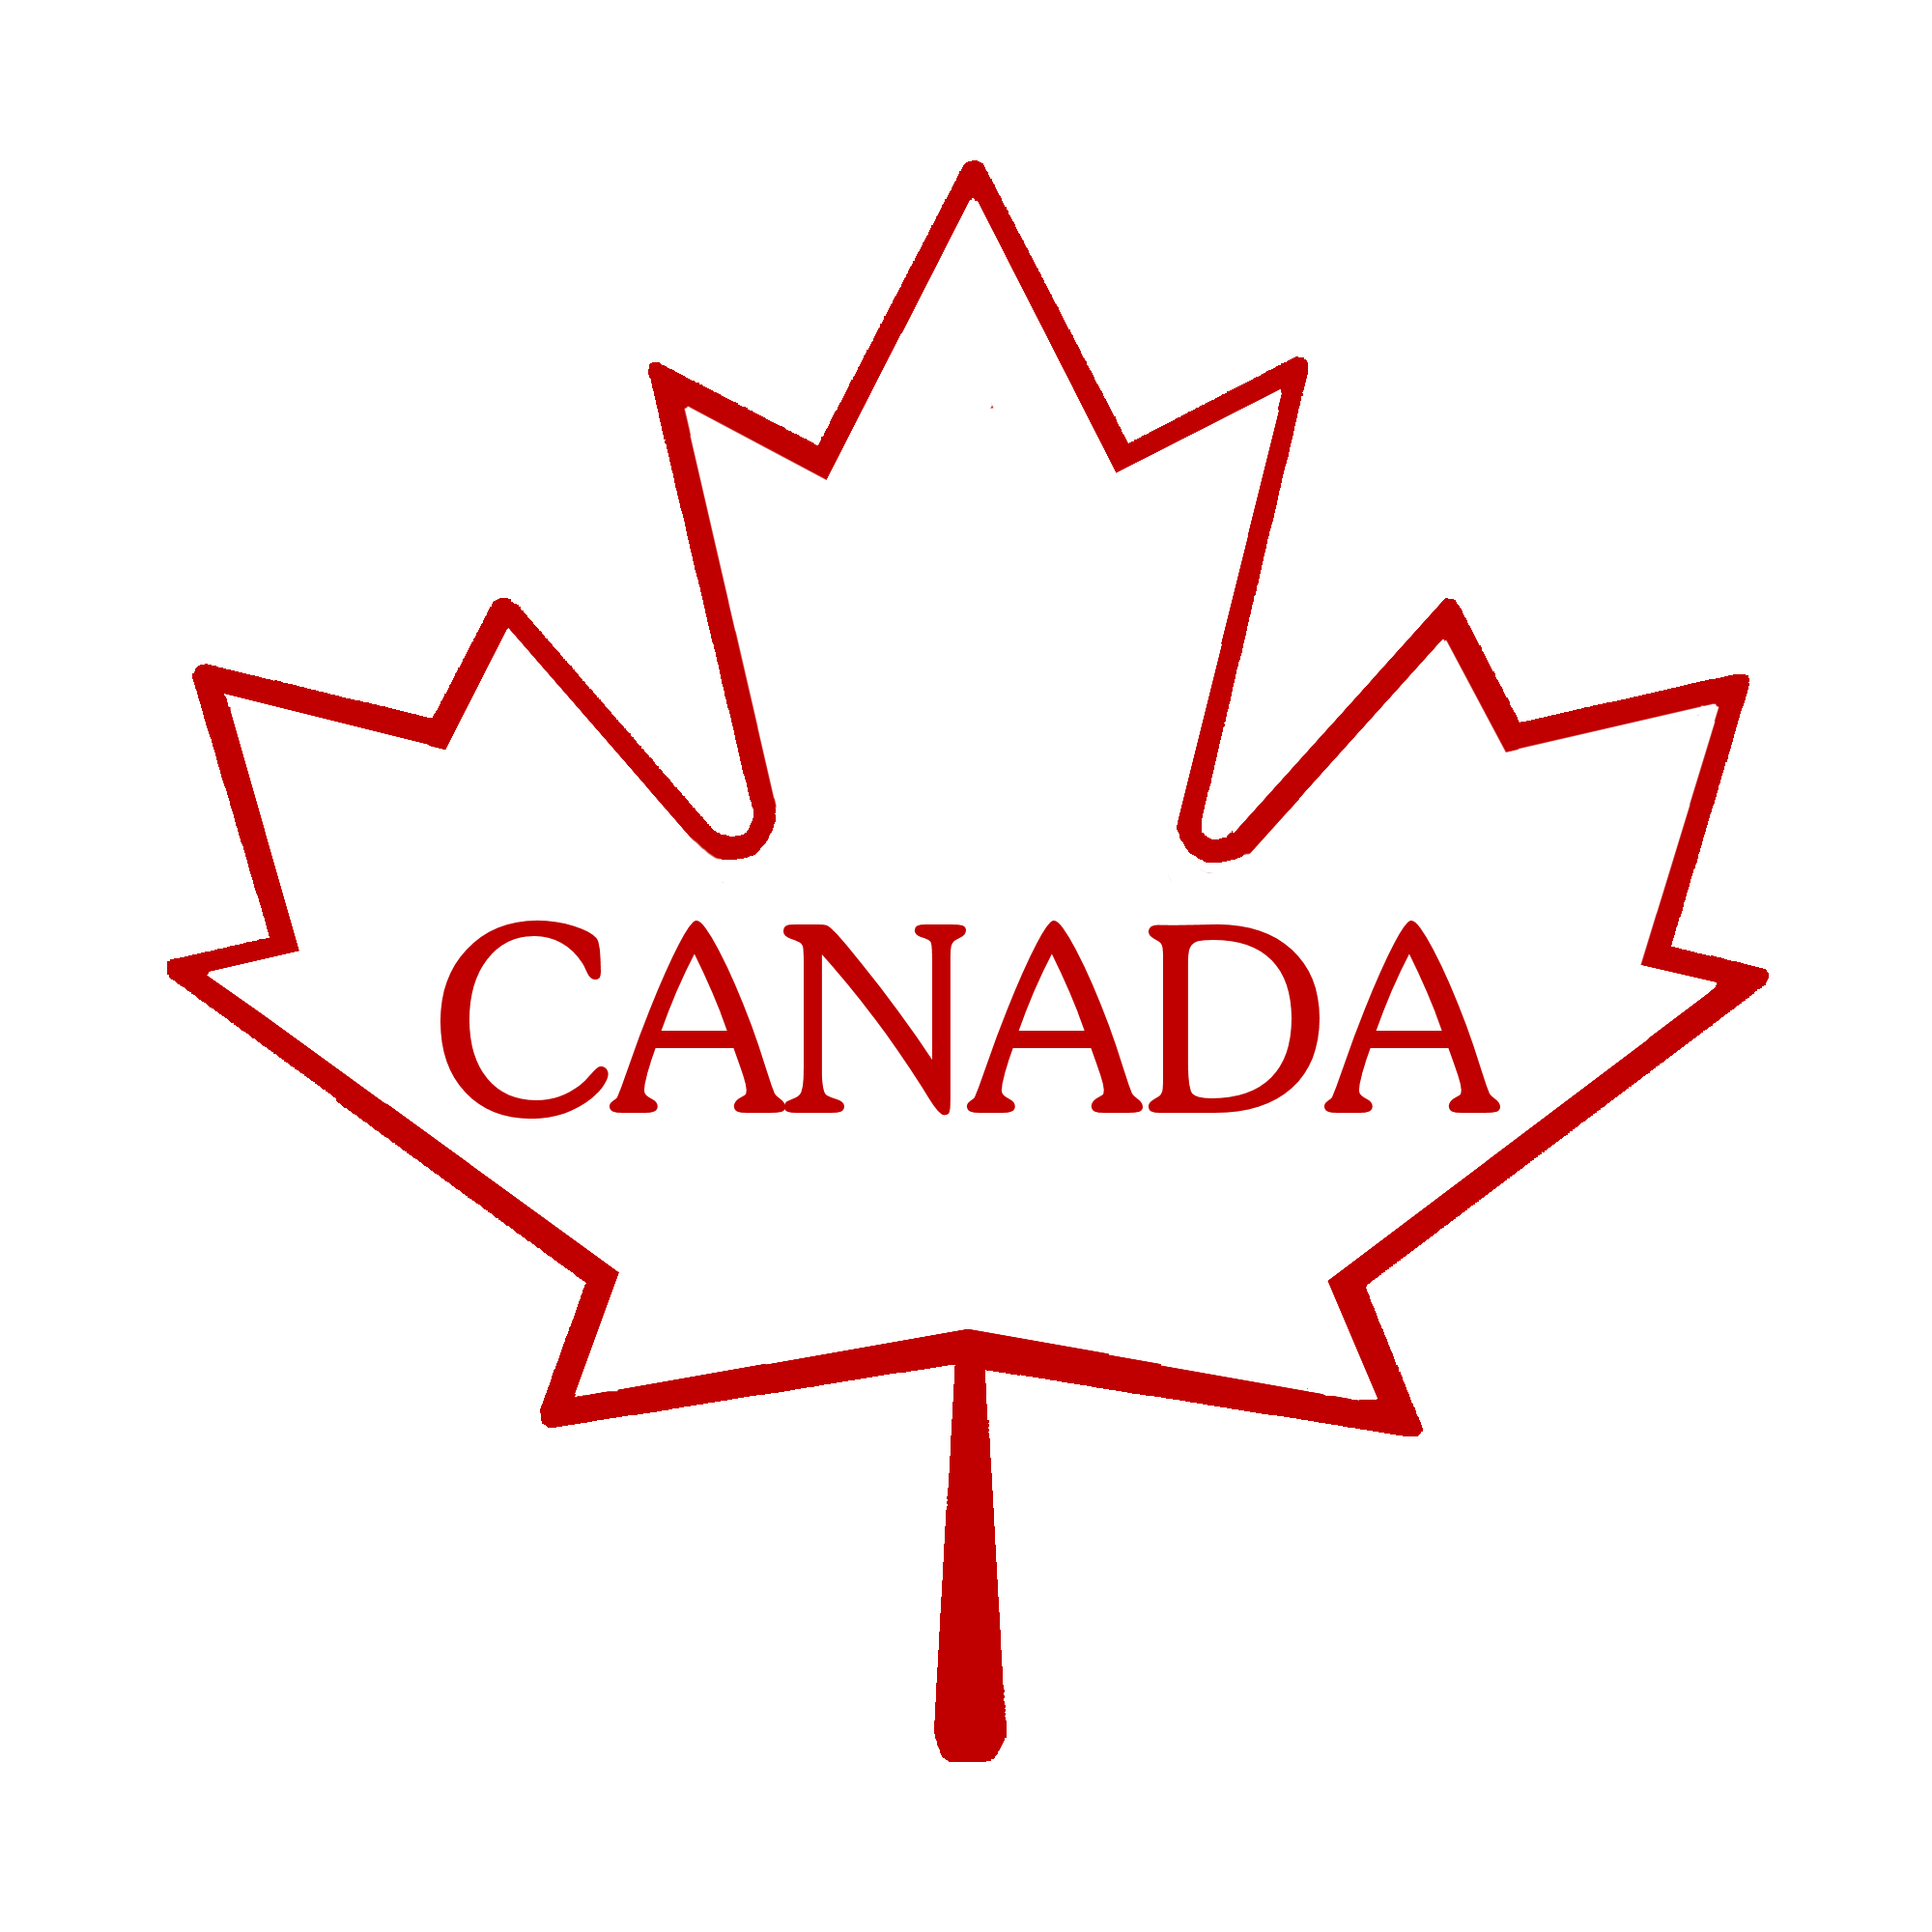 Canadian Maple Leaf Symbolizing Canadas Natural Beauty And Cultural Heritage